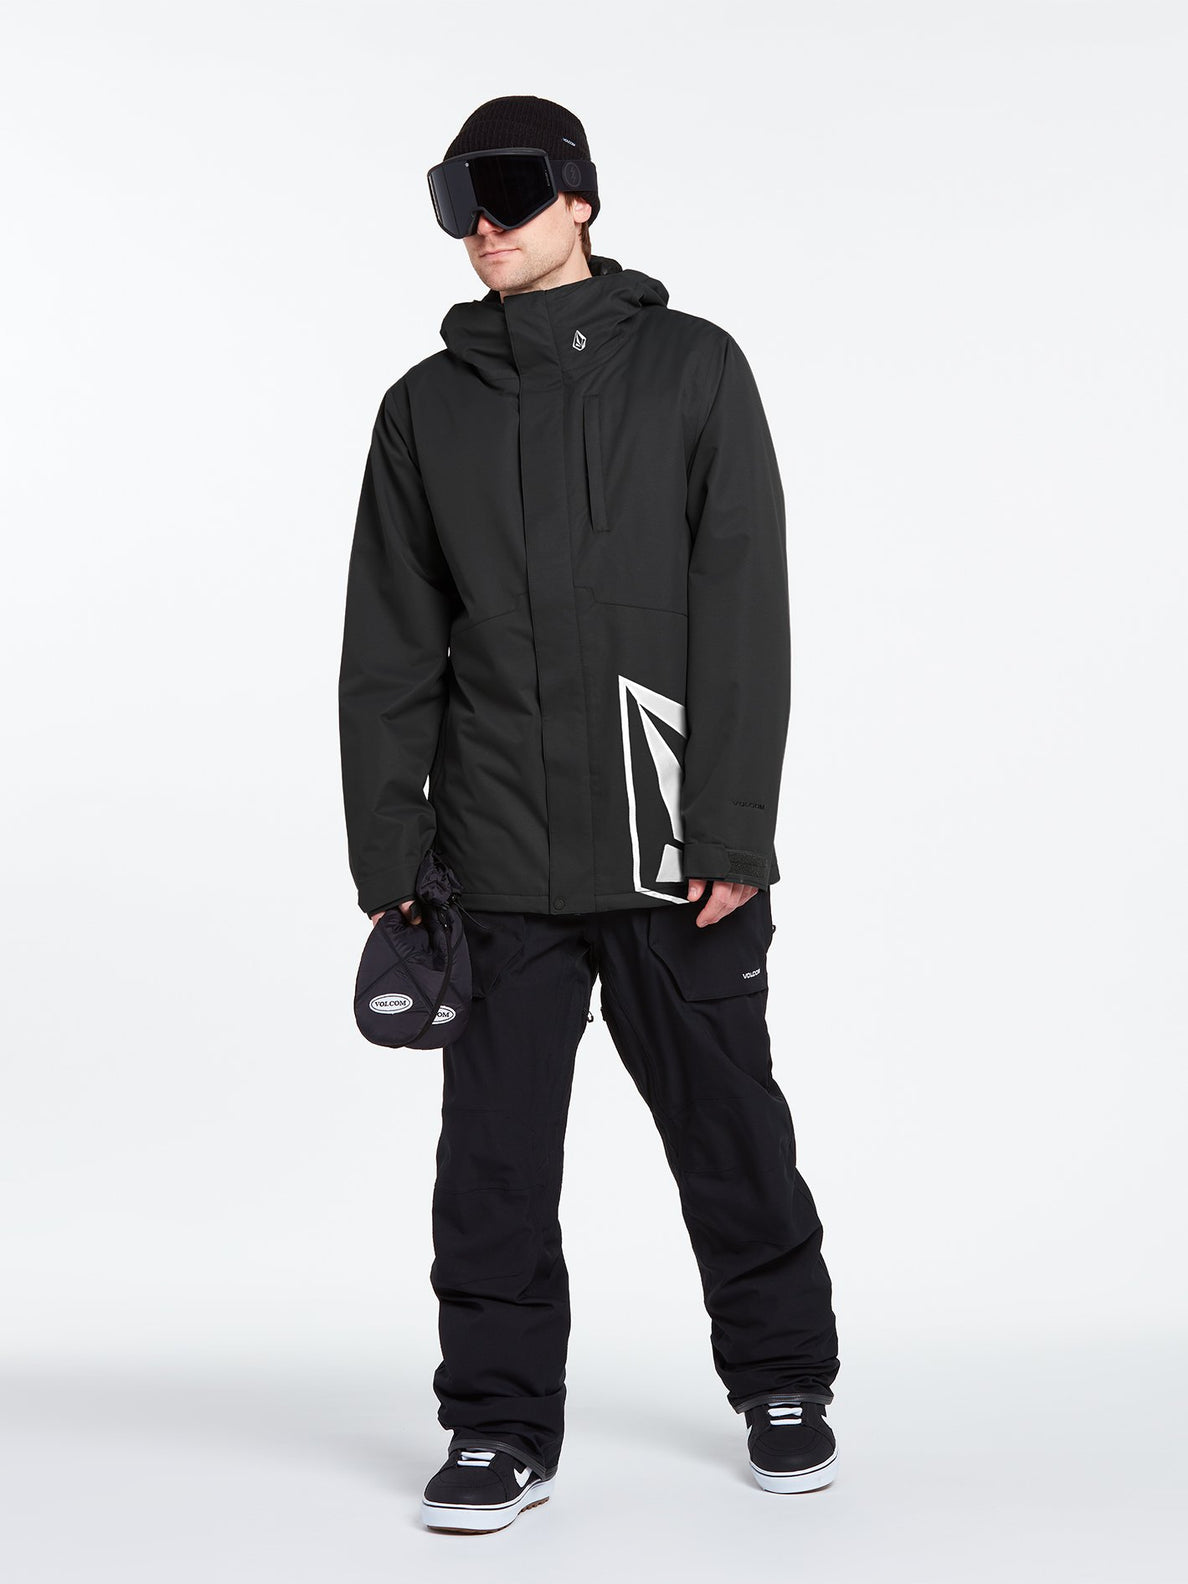 17Forty Insulated Jacket - BLACK (G0452114_BLK) [47]